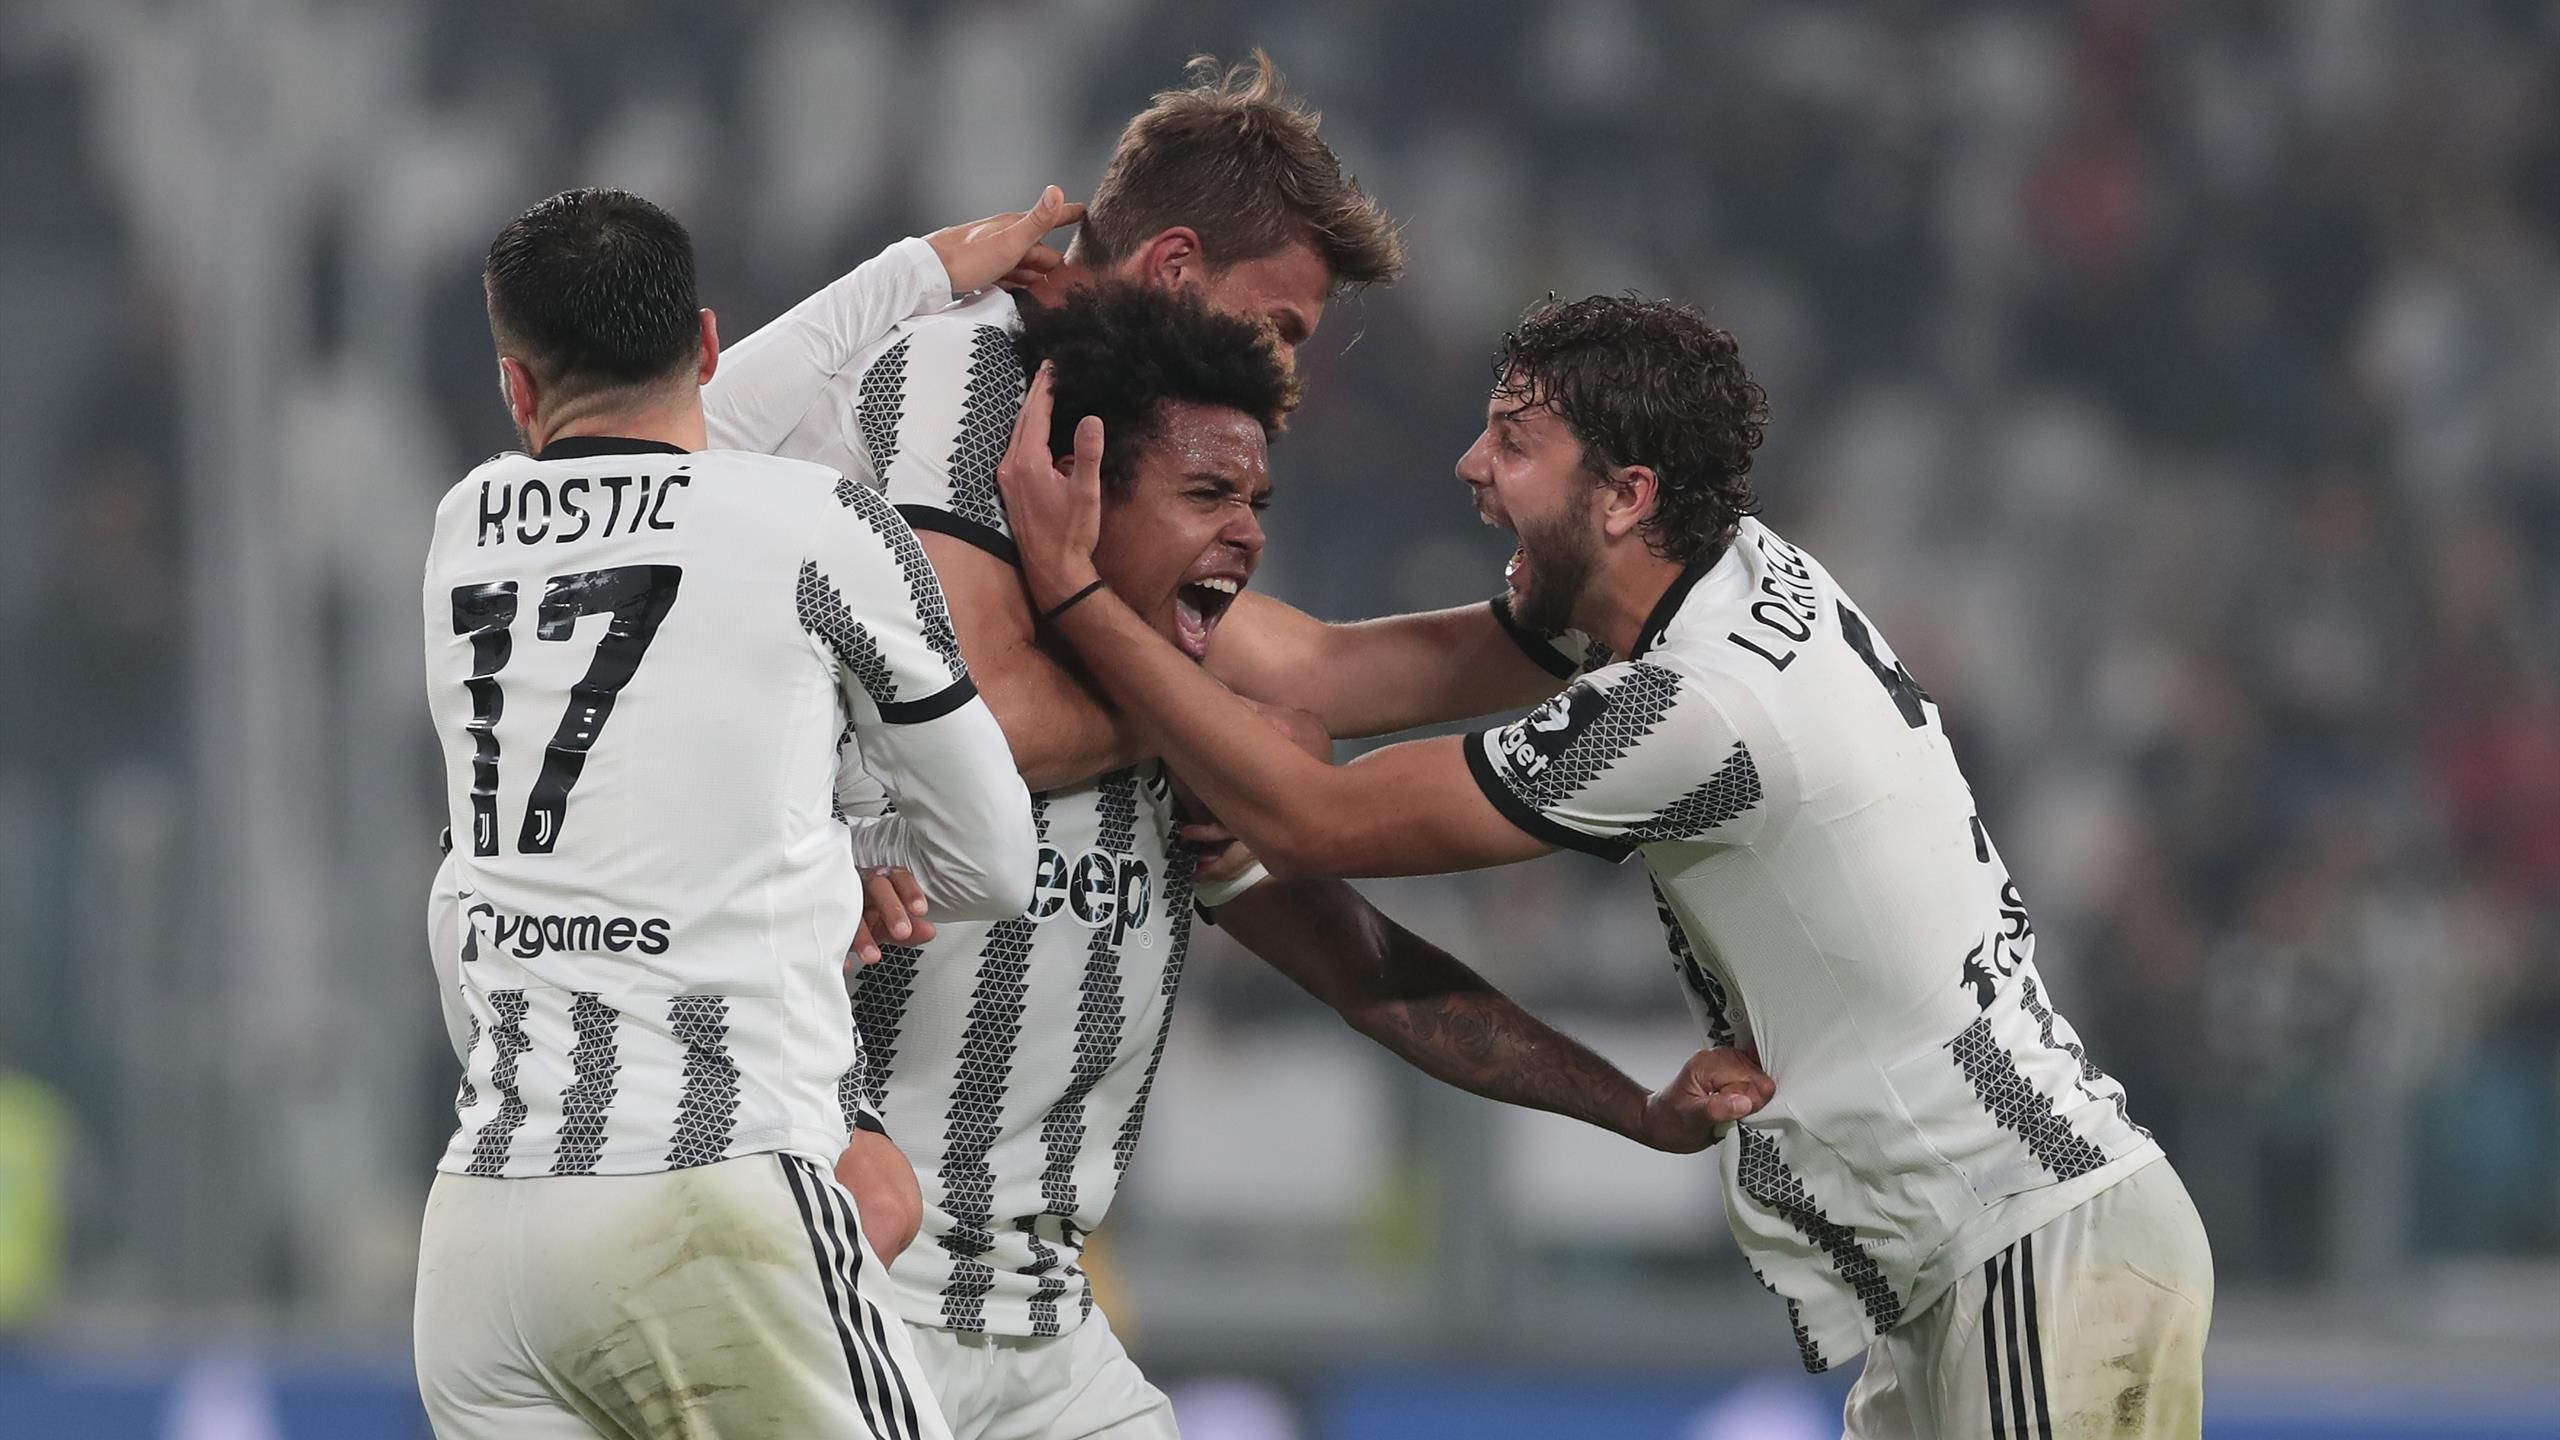 Juventus vs. Palermo 2017: Final score 4-1, Juve cruise to comfortable  victory against timid Palermo - Black & White & Read All Over